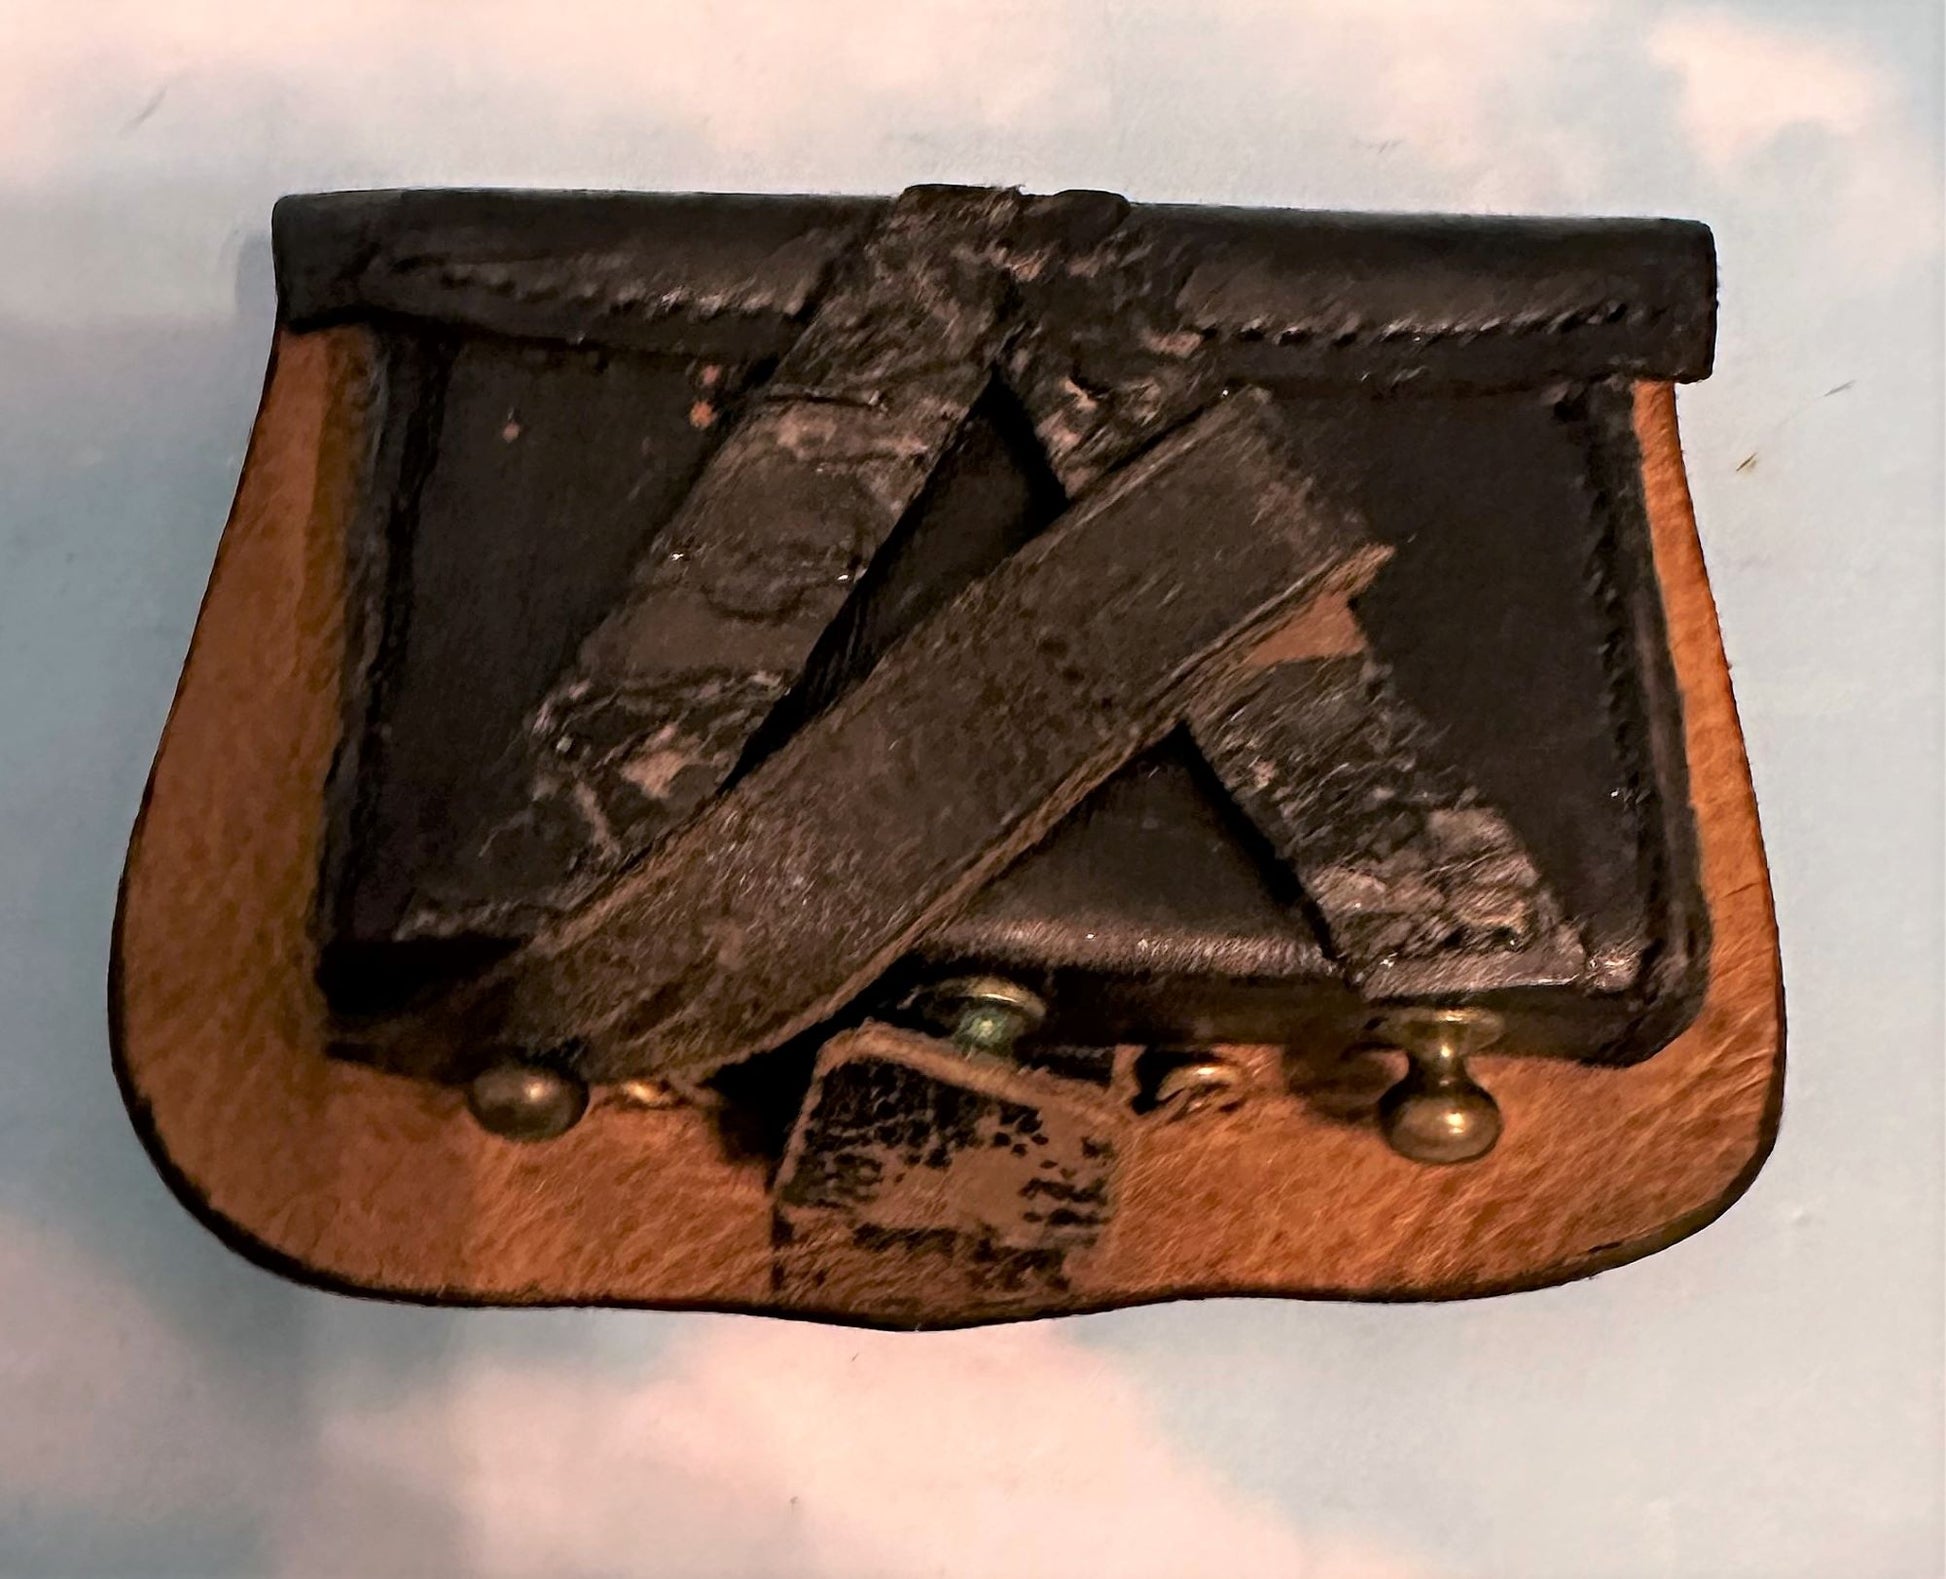 Prussian leather belt and cartridge box once worn by officers of the prestigious 1. Leib-Husaren-Regiment Nr 1 and 2. Leib-Husaren-Regiment Nr 2 - Derrittmeister Militaria Group